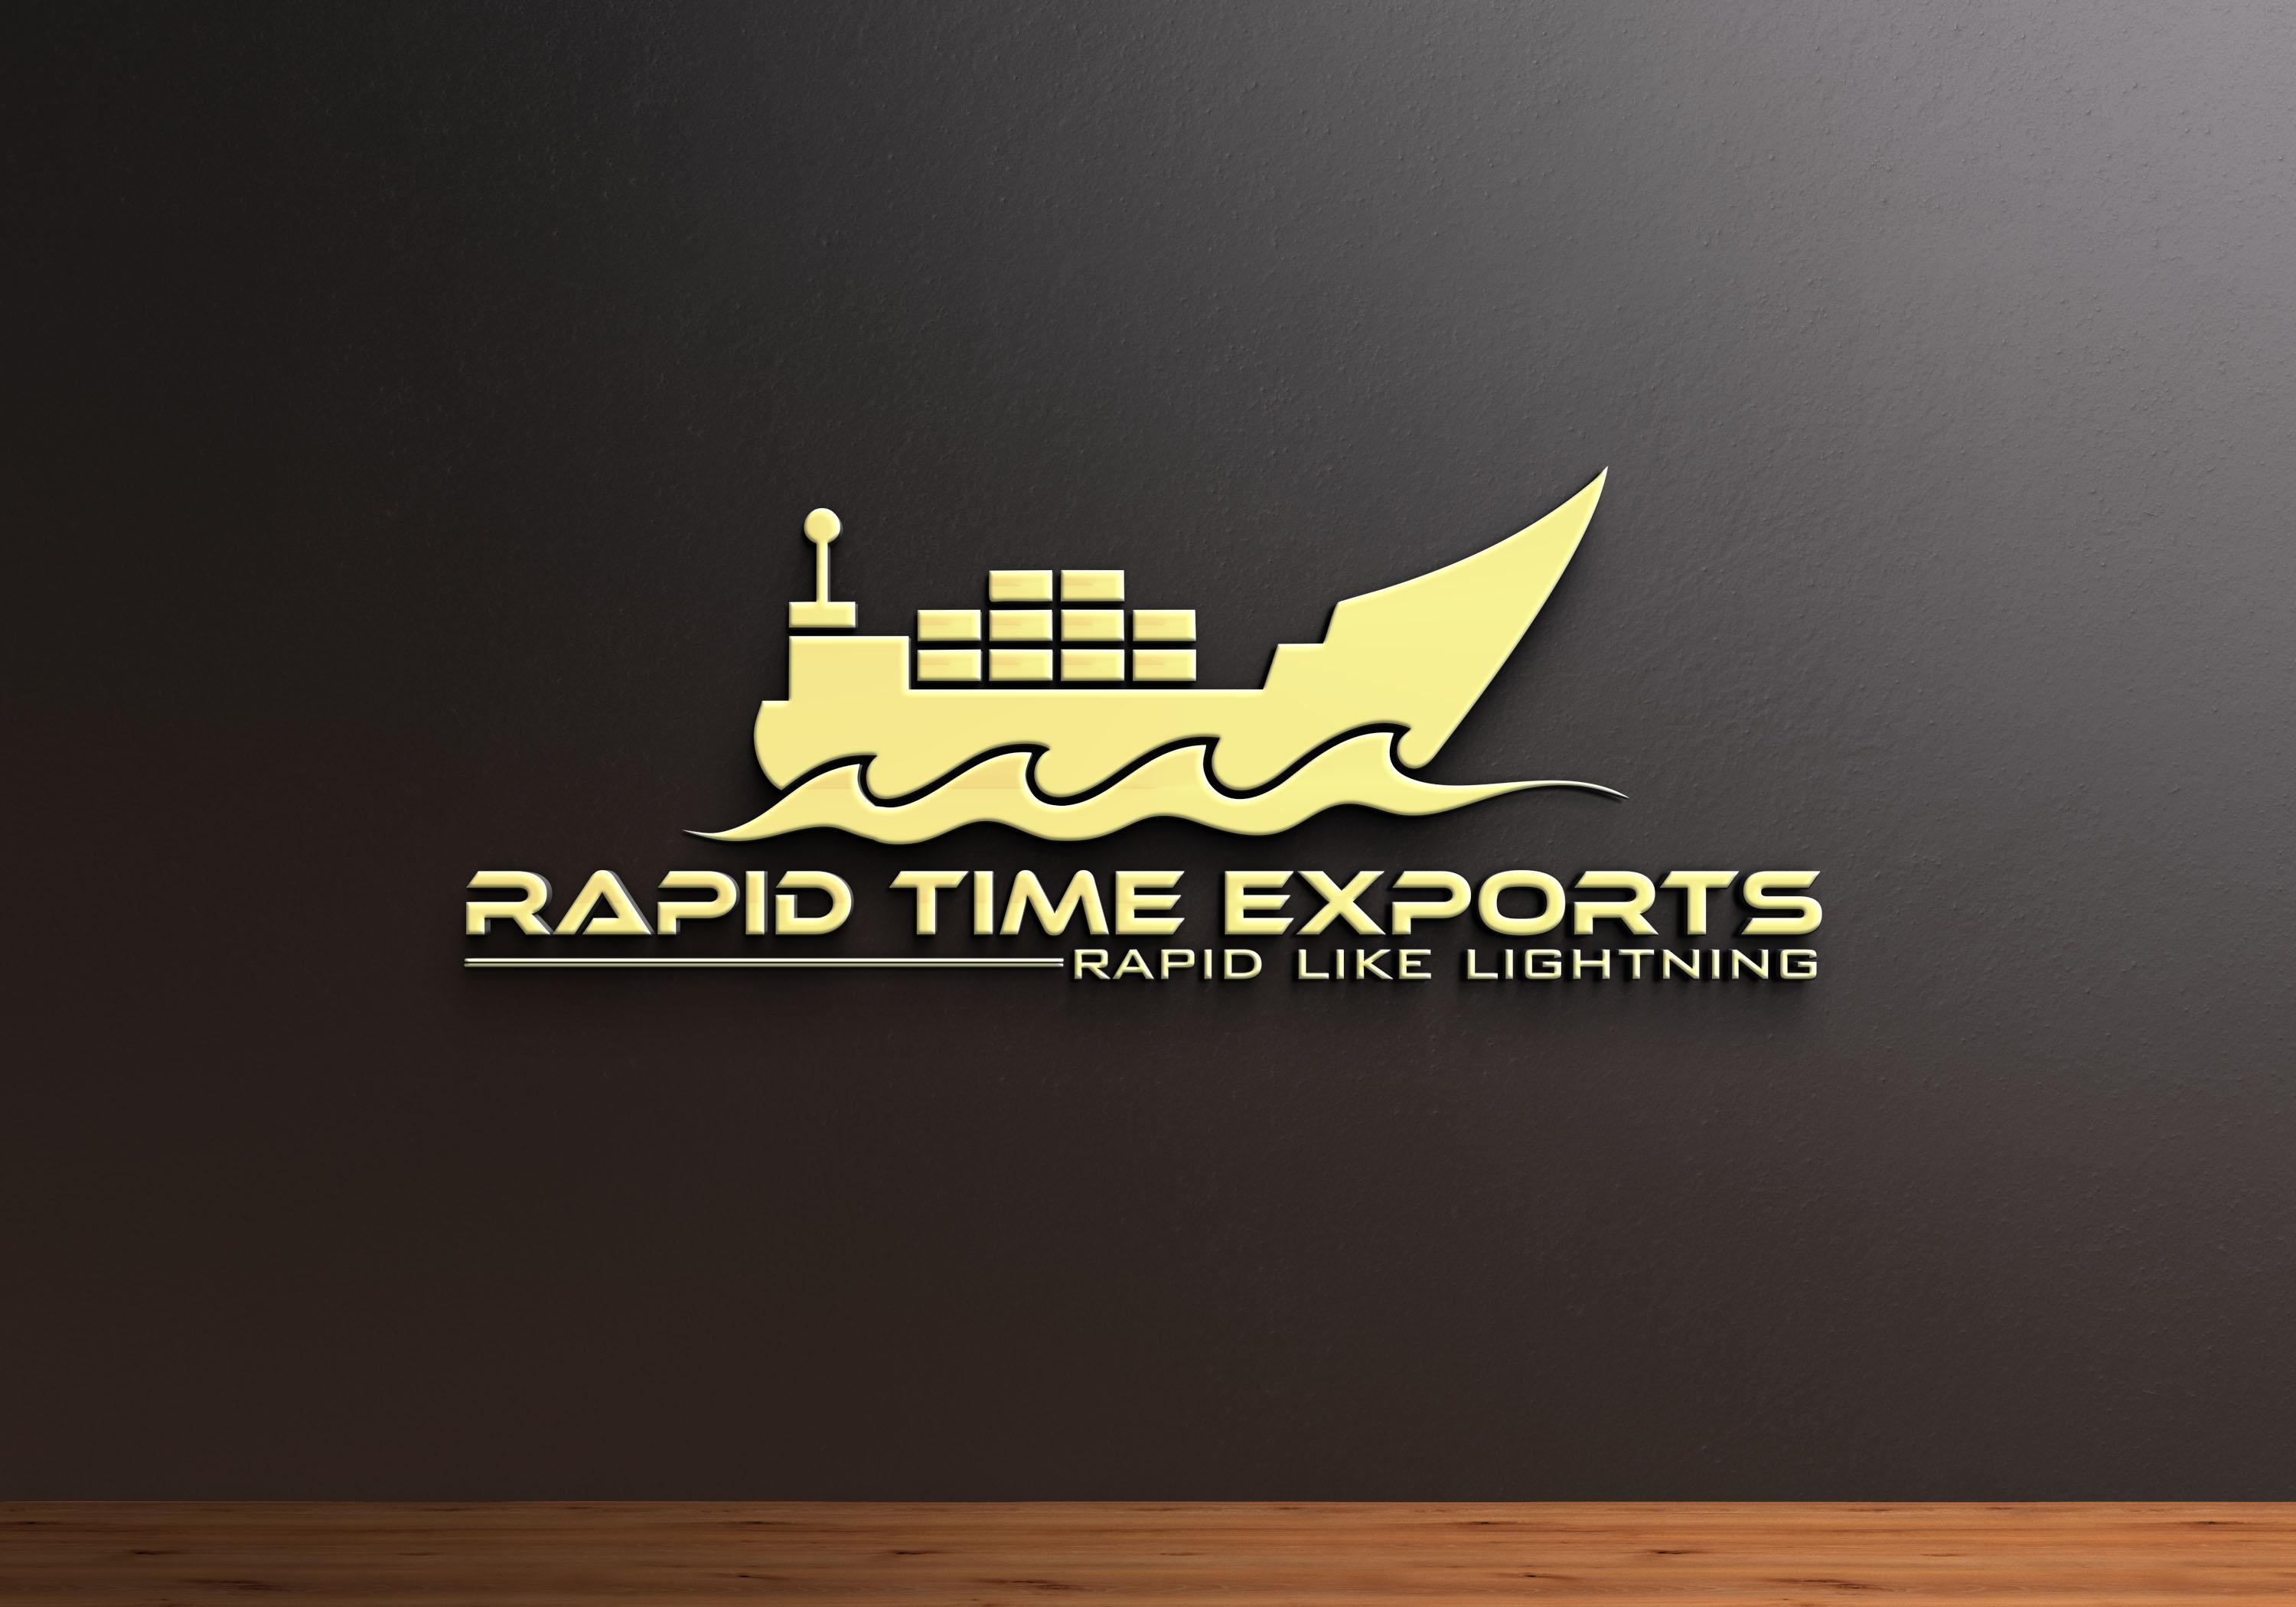 RAPID TIME EXPORTS